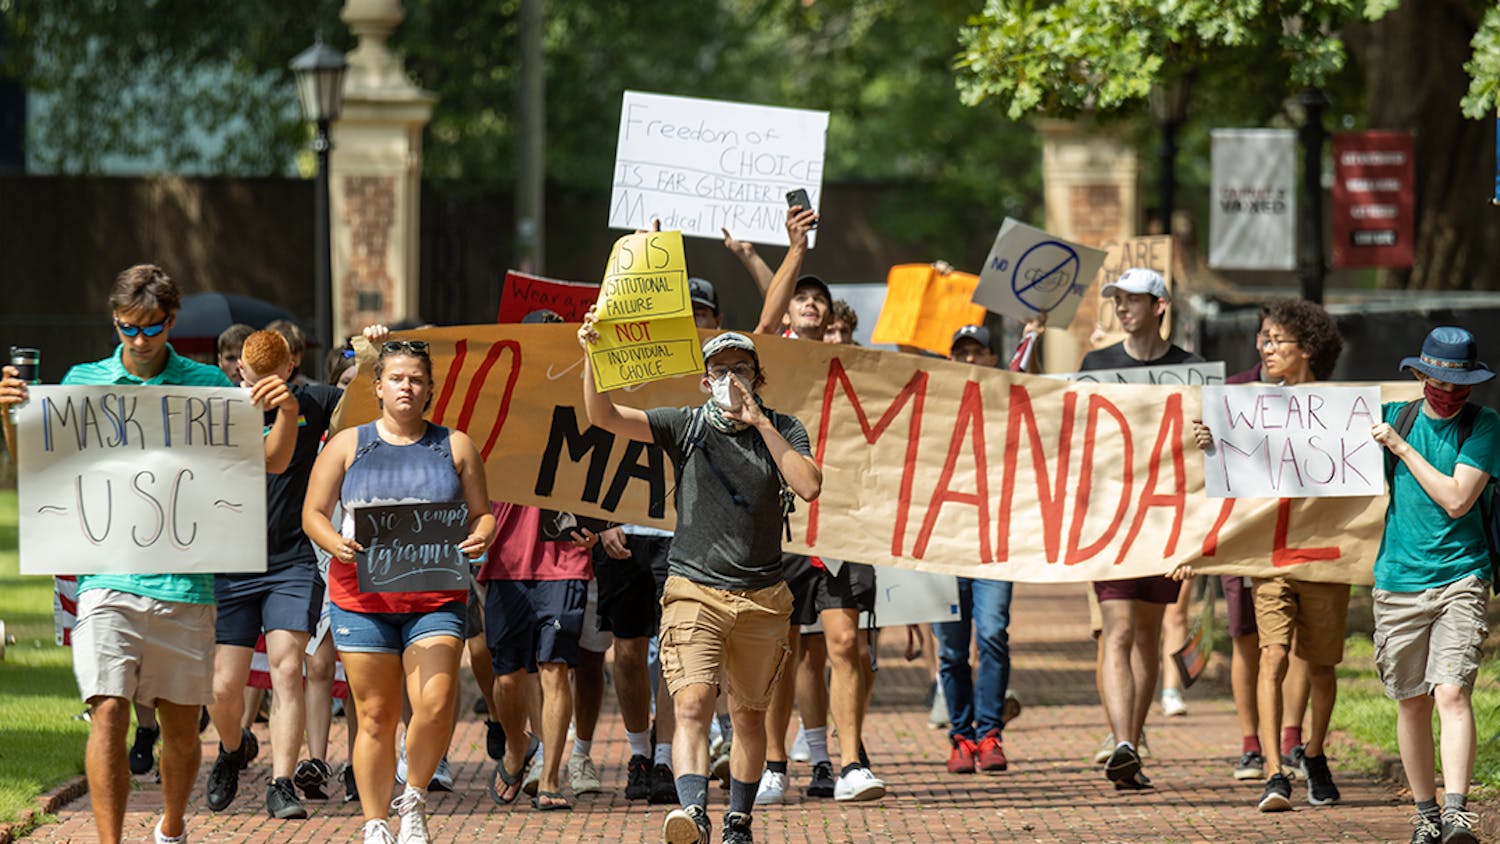 The USC Turning Point USA chapter protests on the Horseshoe over the mask mandate while the Carolina Socialists counterprotest. The mask mandate was put in place by interim university President Harris Pastides on Aug. 18, 2021.